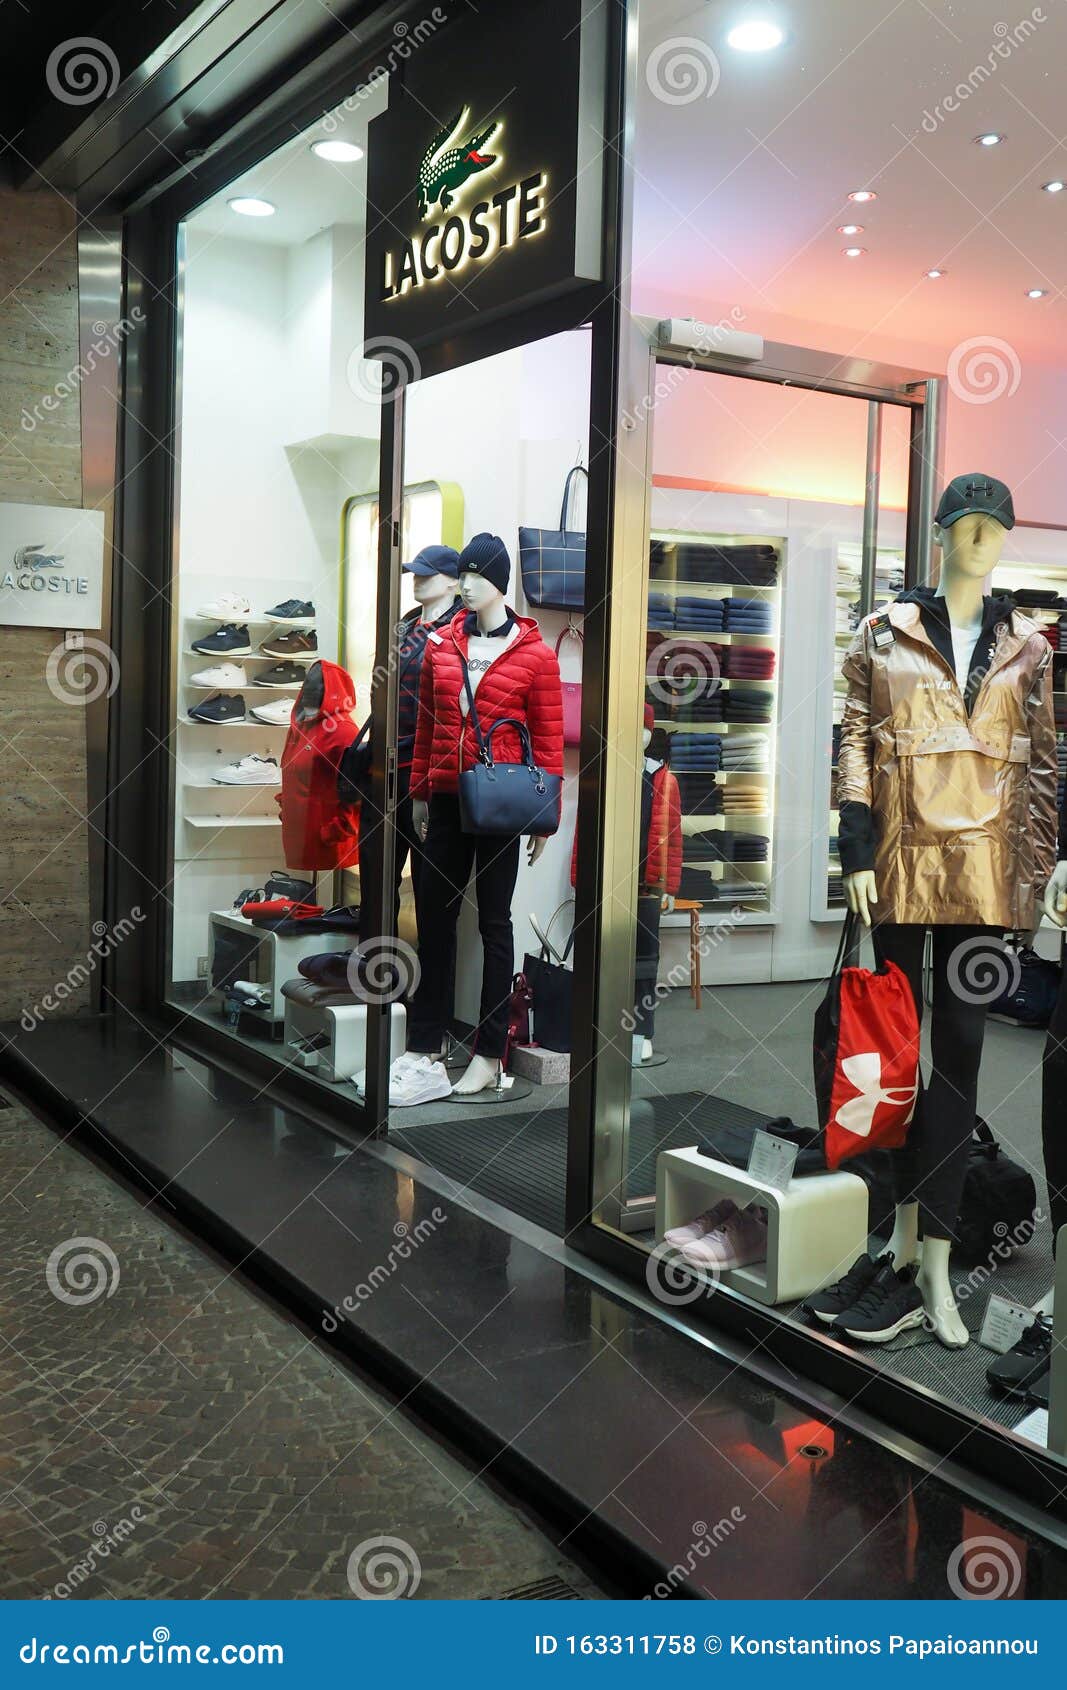 Fashion Shop in Italy Stock - Image district, dress: 163311758